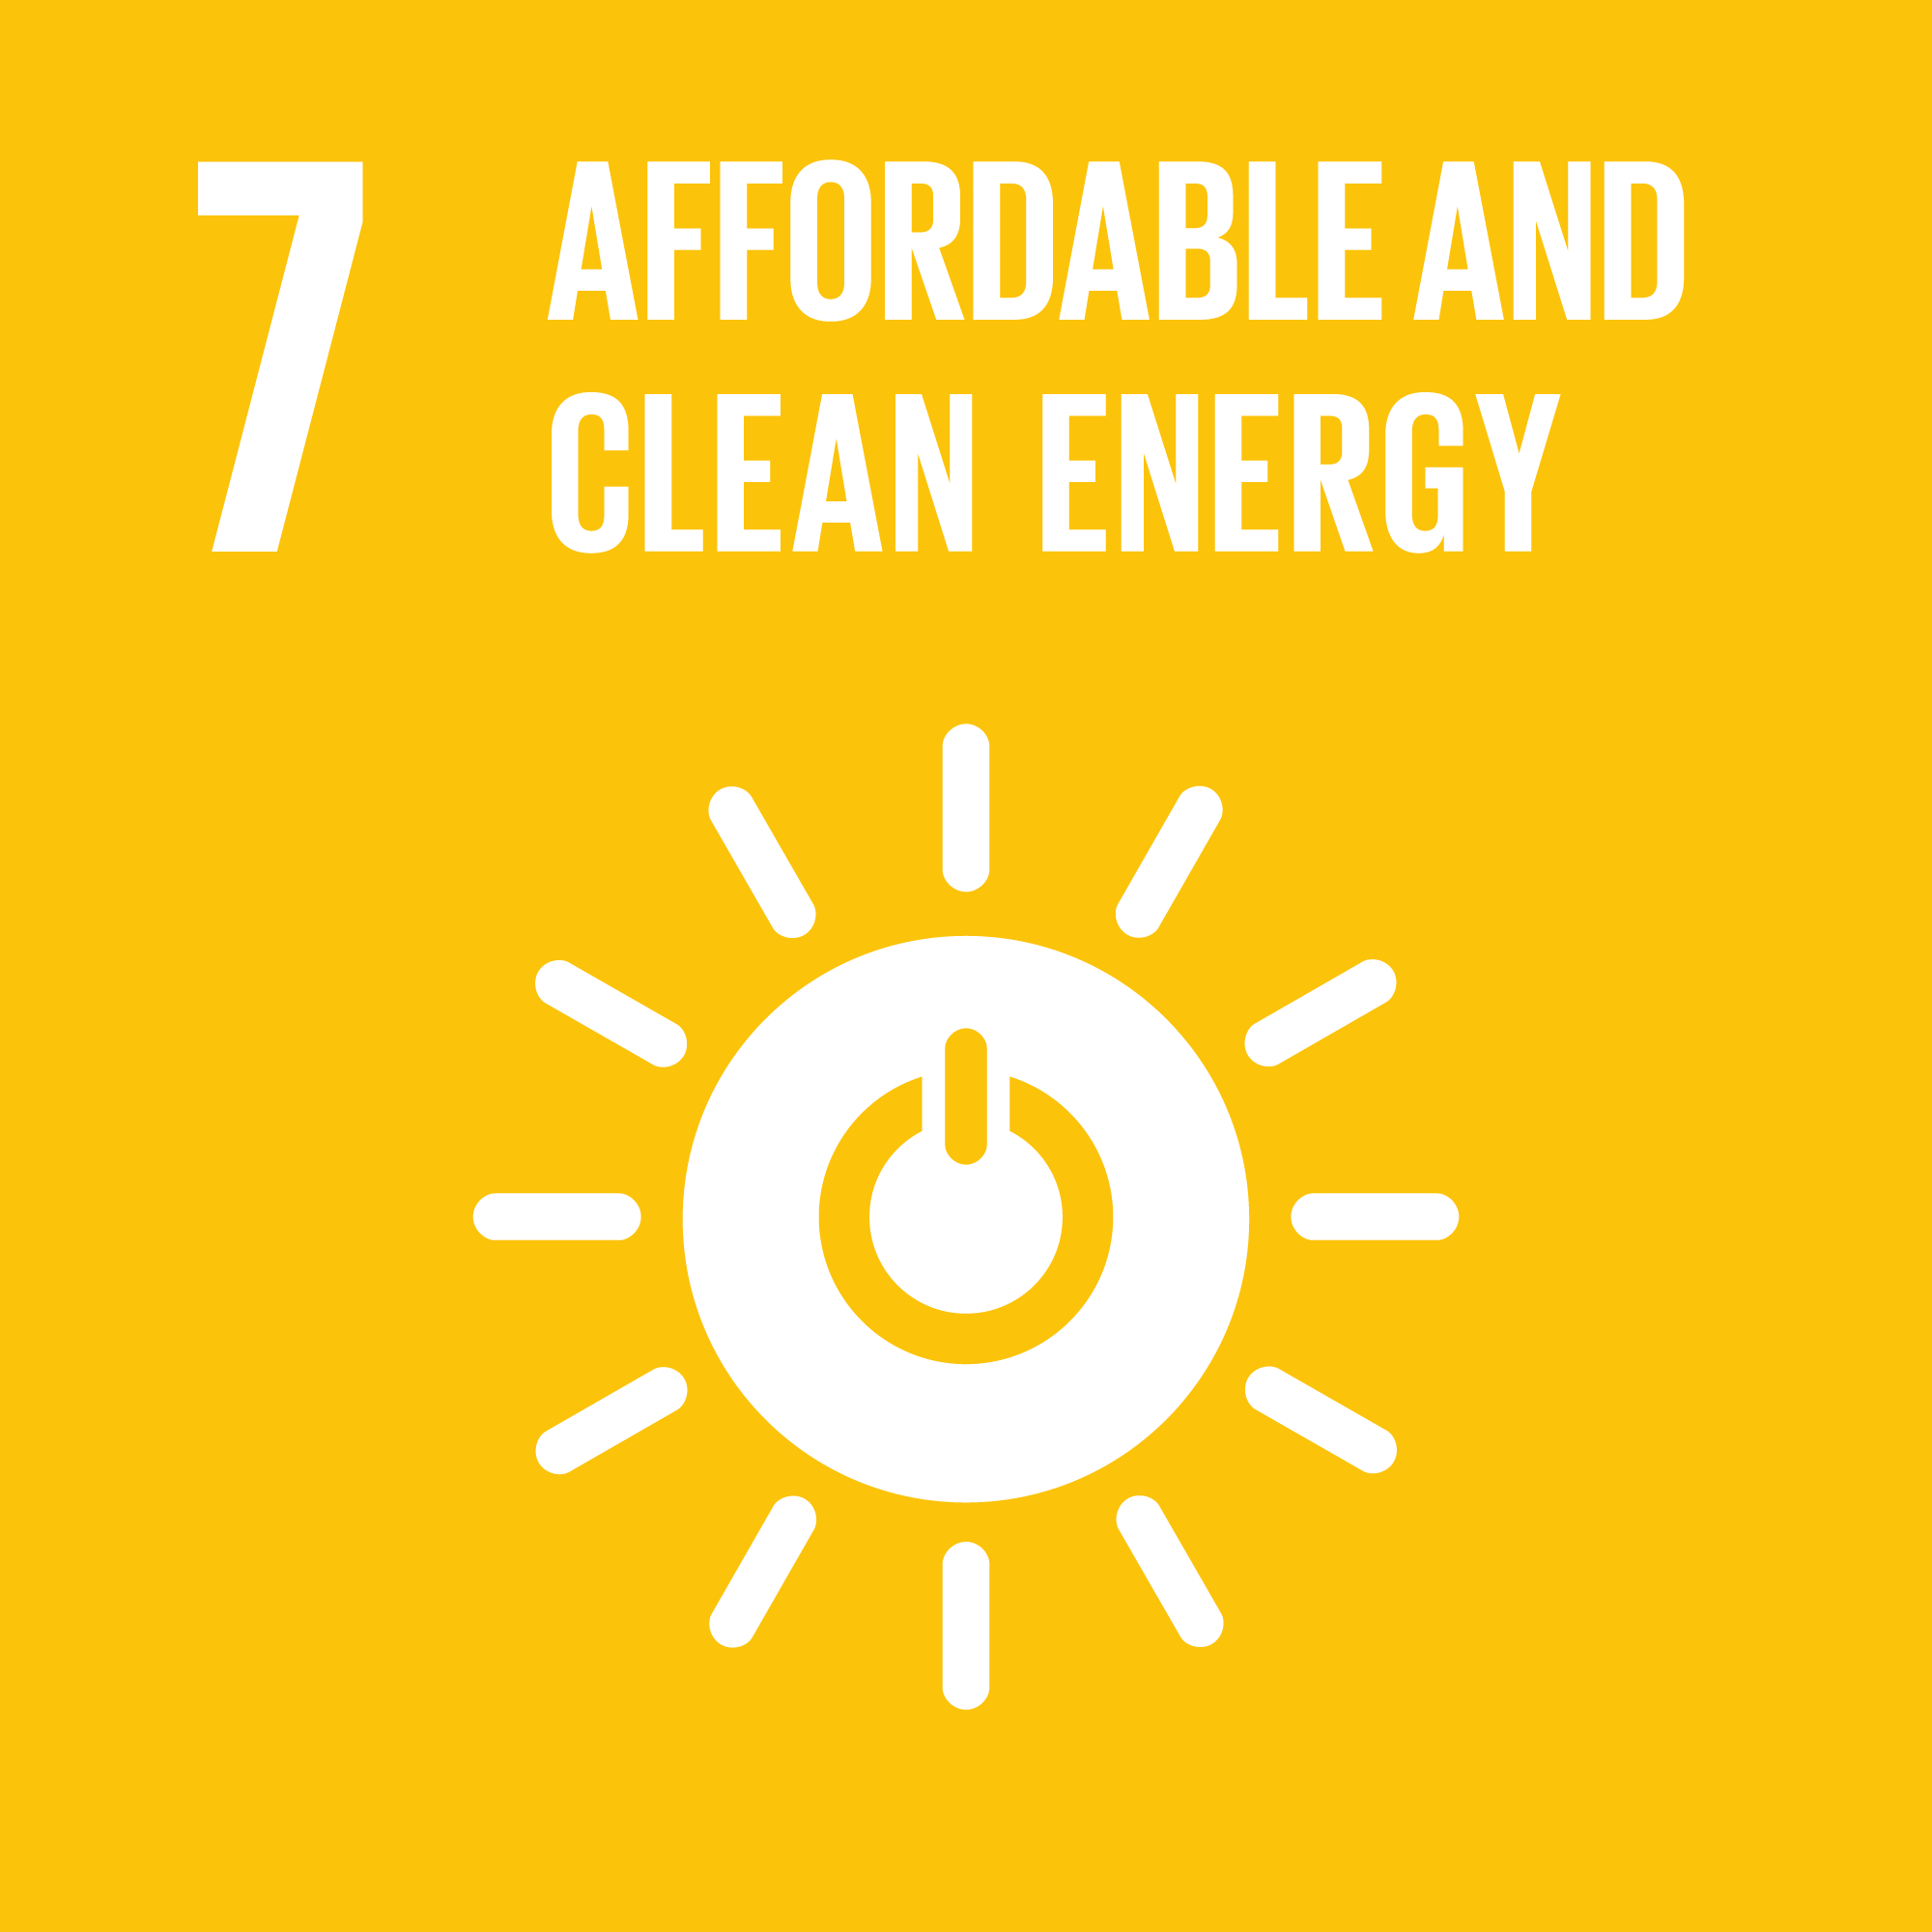 Sustainable Development Goal 7: Affordable and Clean Energy